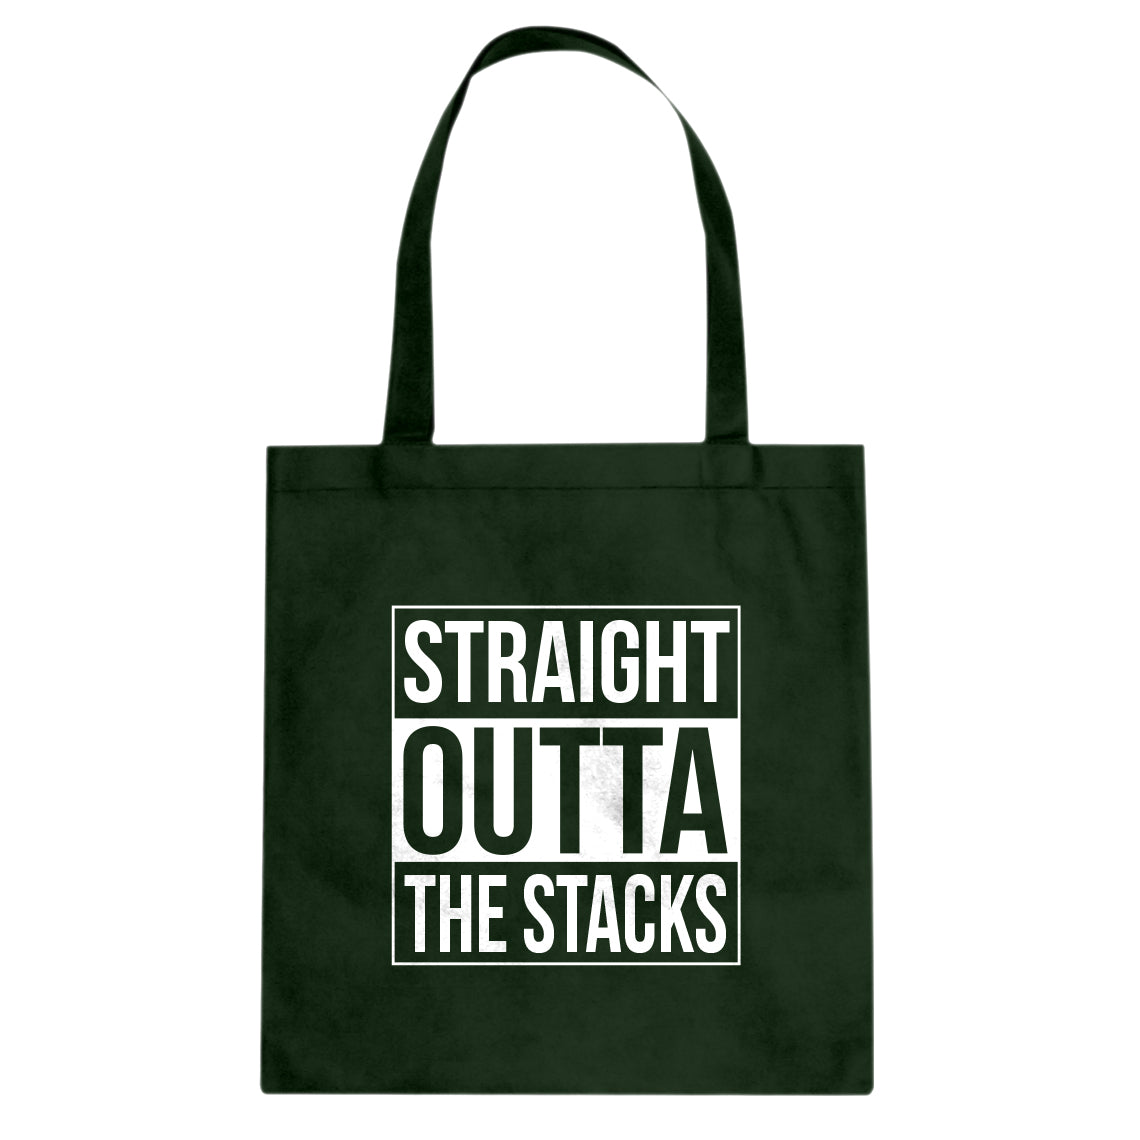 Tote Straight Outta the Stacks Canvas Tote Bag – Indica Plateau